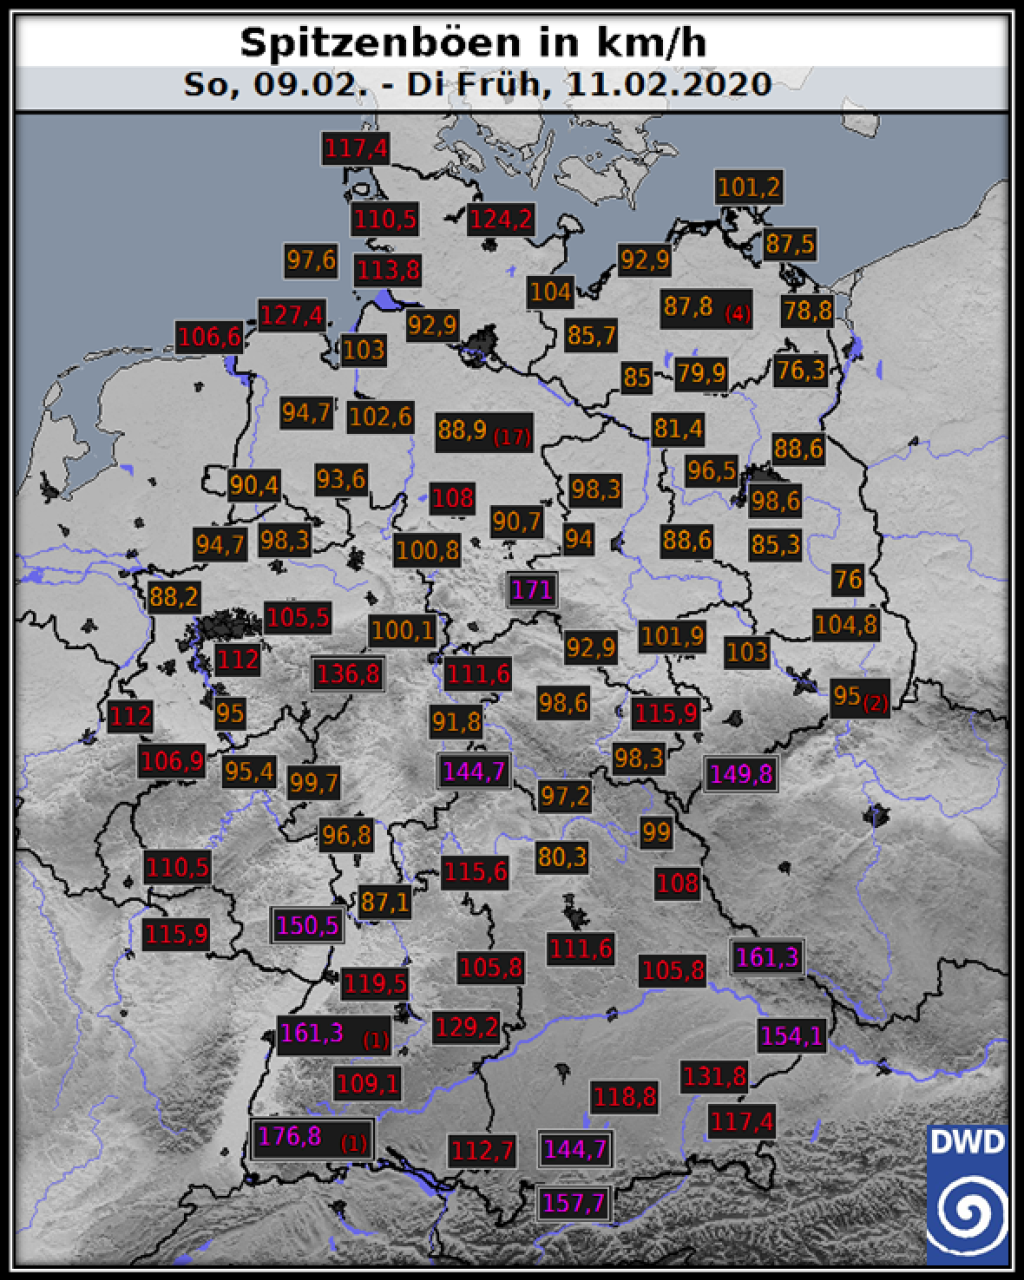 Peak gusts between Sunday and Tuesday in Germany.